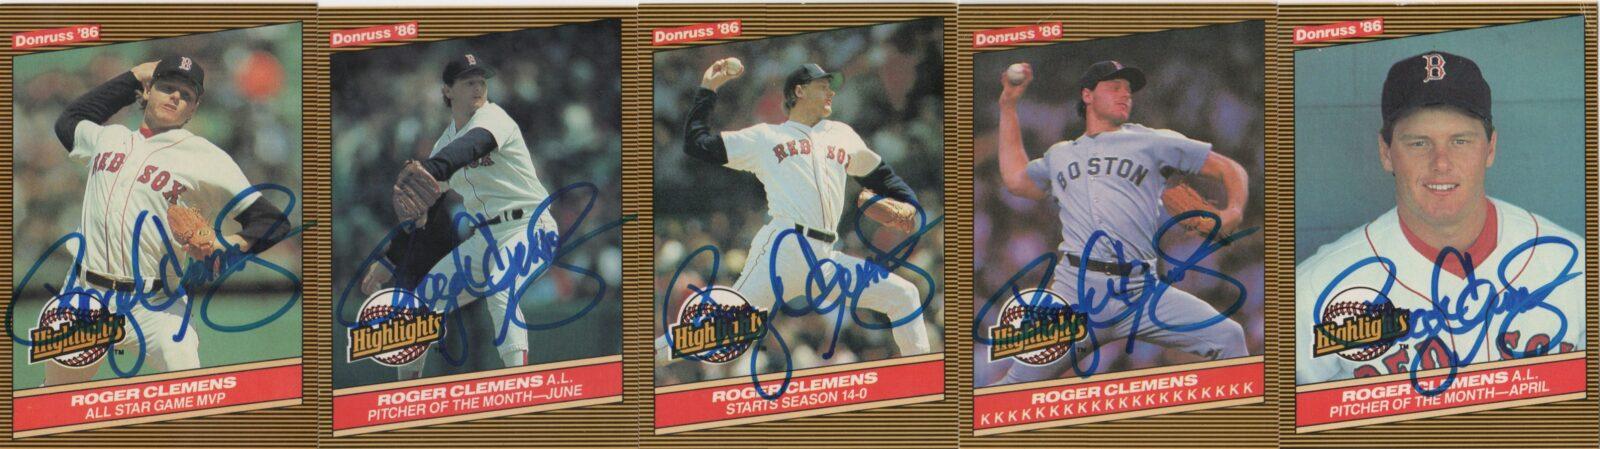 roger clemens red sox 1986